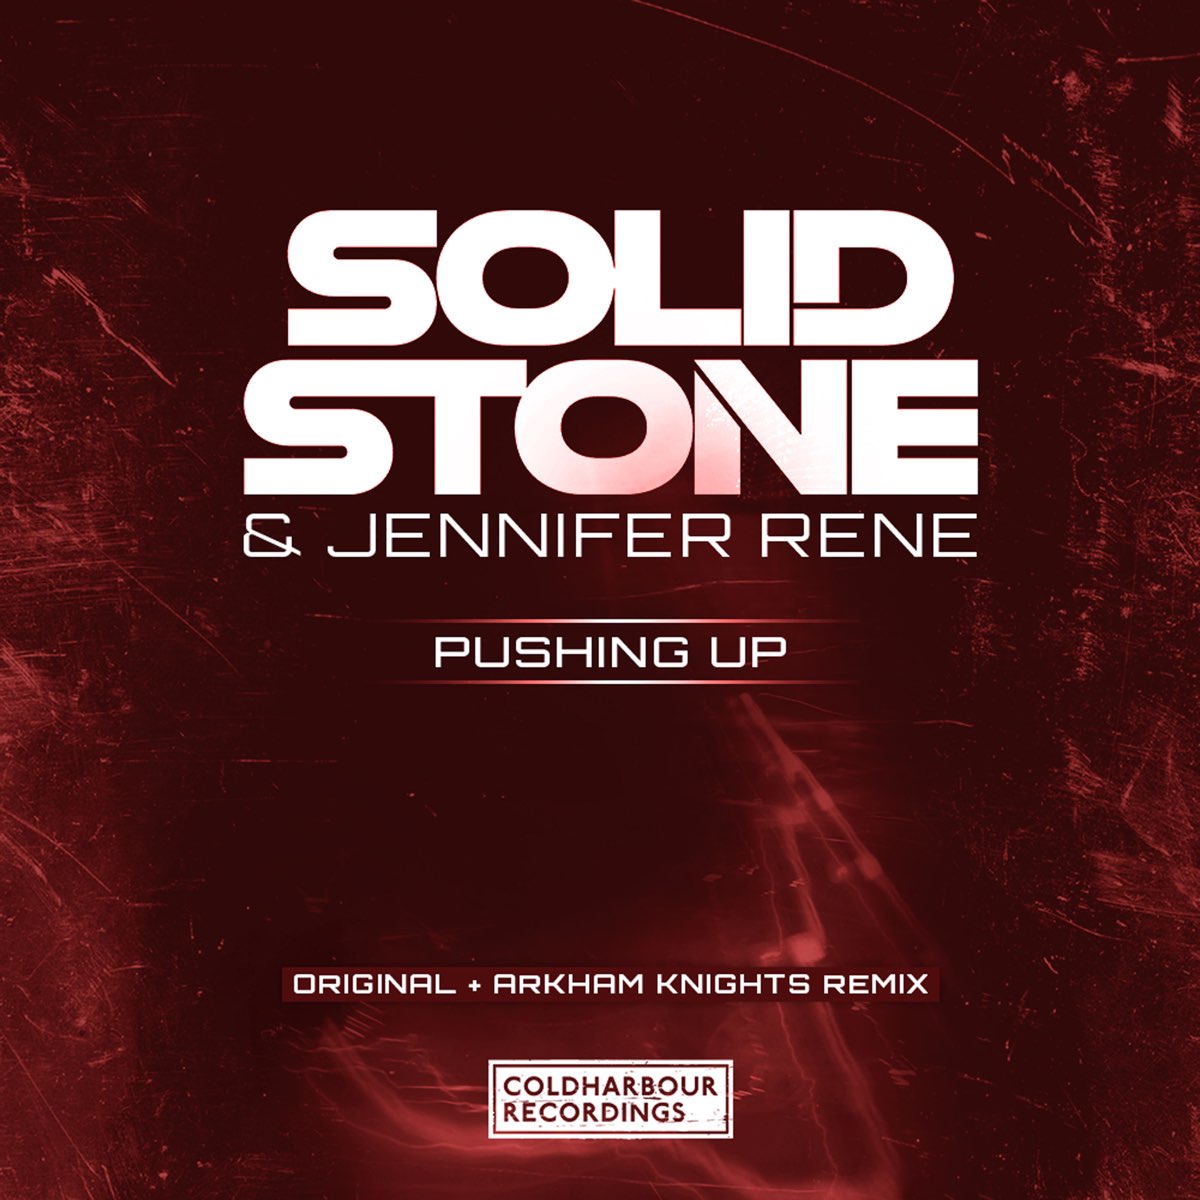 Solid stone. Jennifer Rene. Coldharbour recordings – clhr009. Call of the Heart. Diversion Elias Erium | Solid Stone.